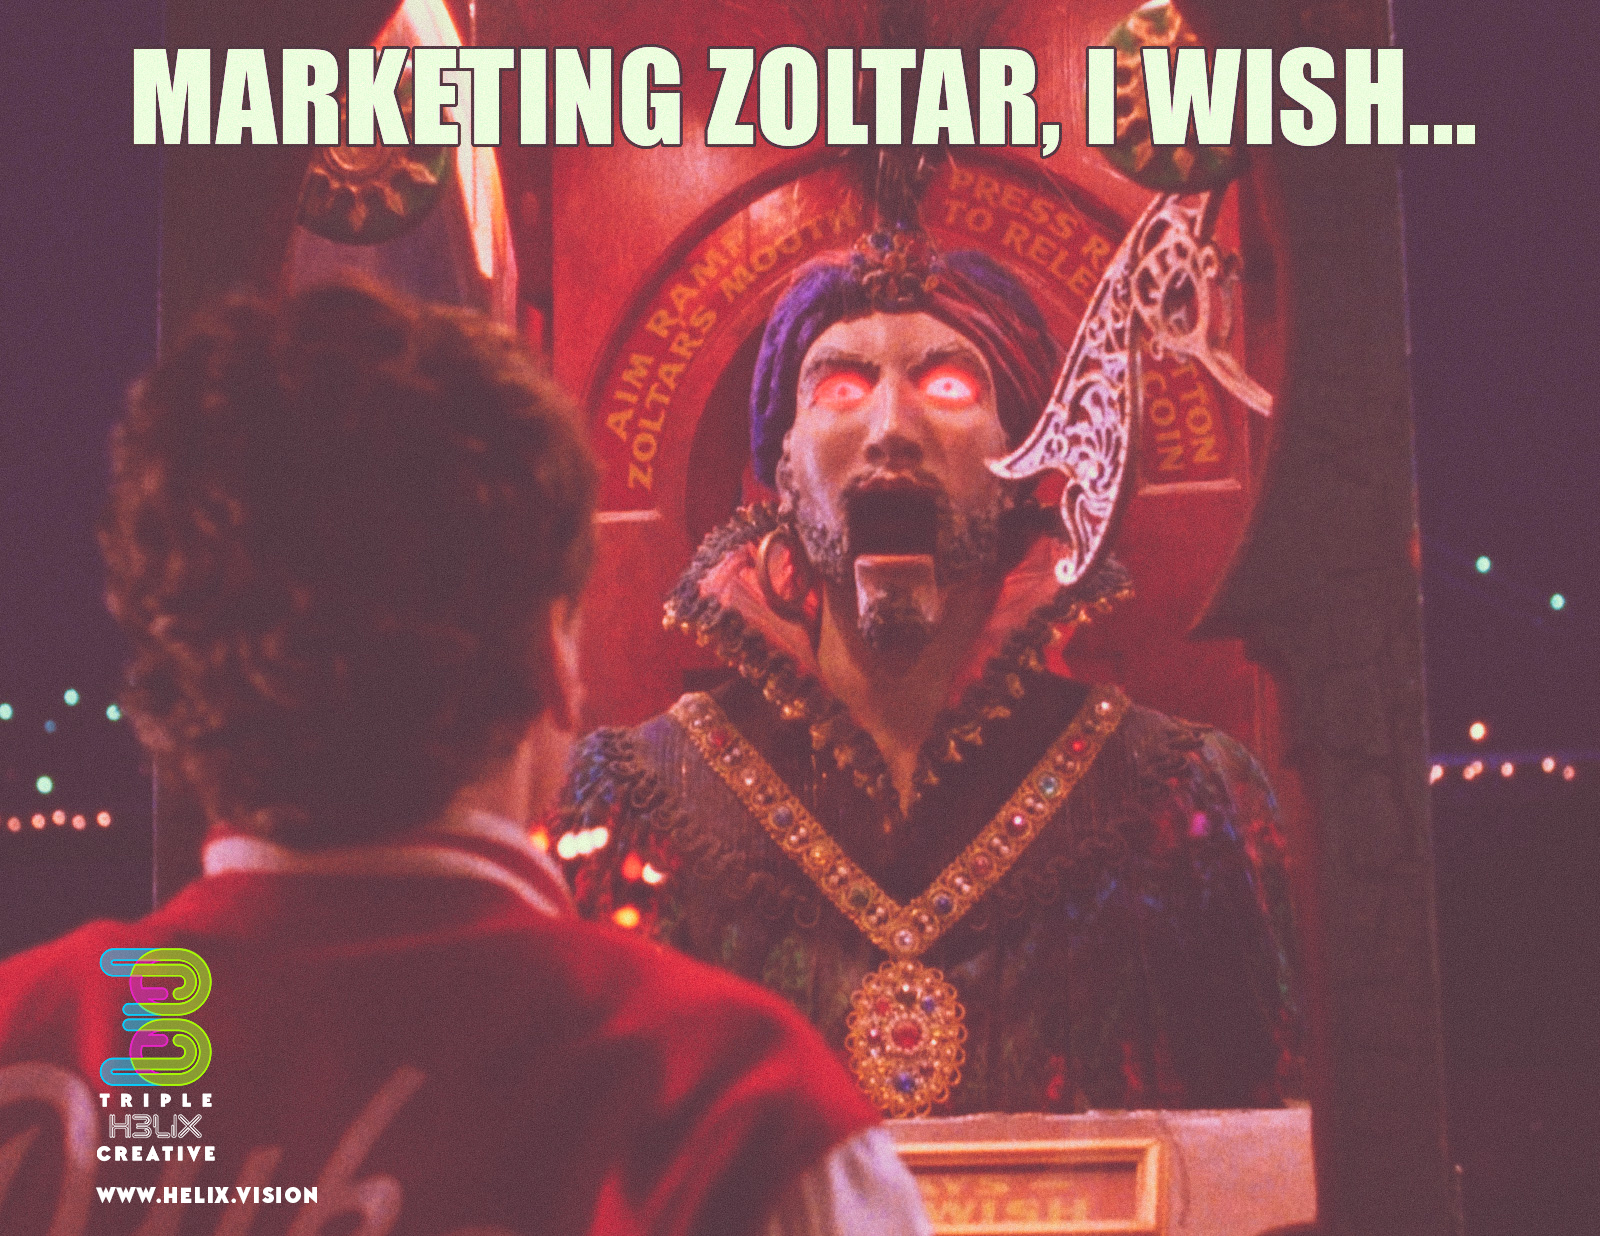 Triple Helix Creative uses a play on the Zoltar meme to share great ideas with businesses for marketing